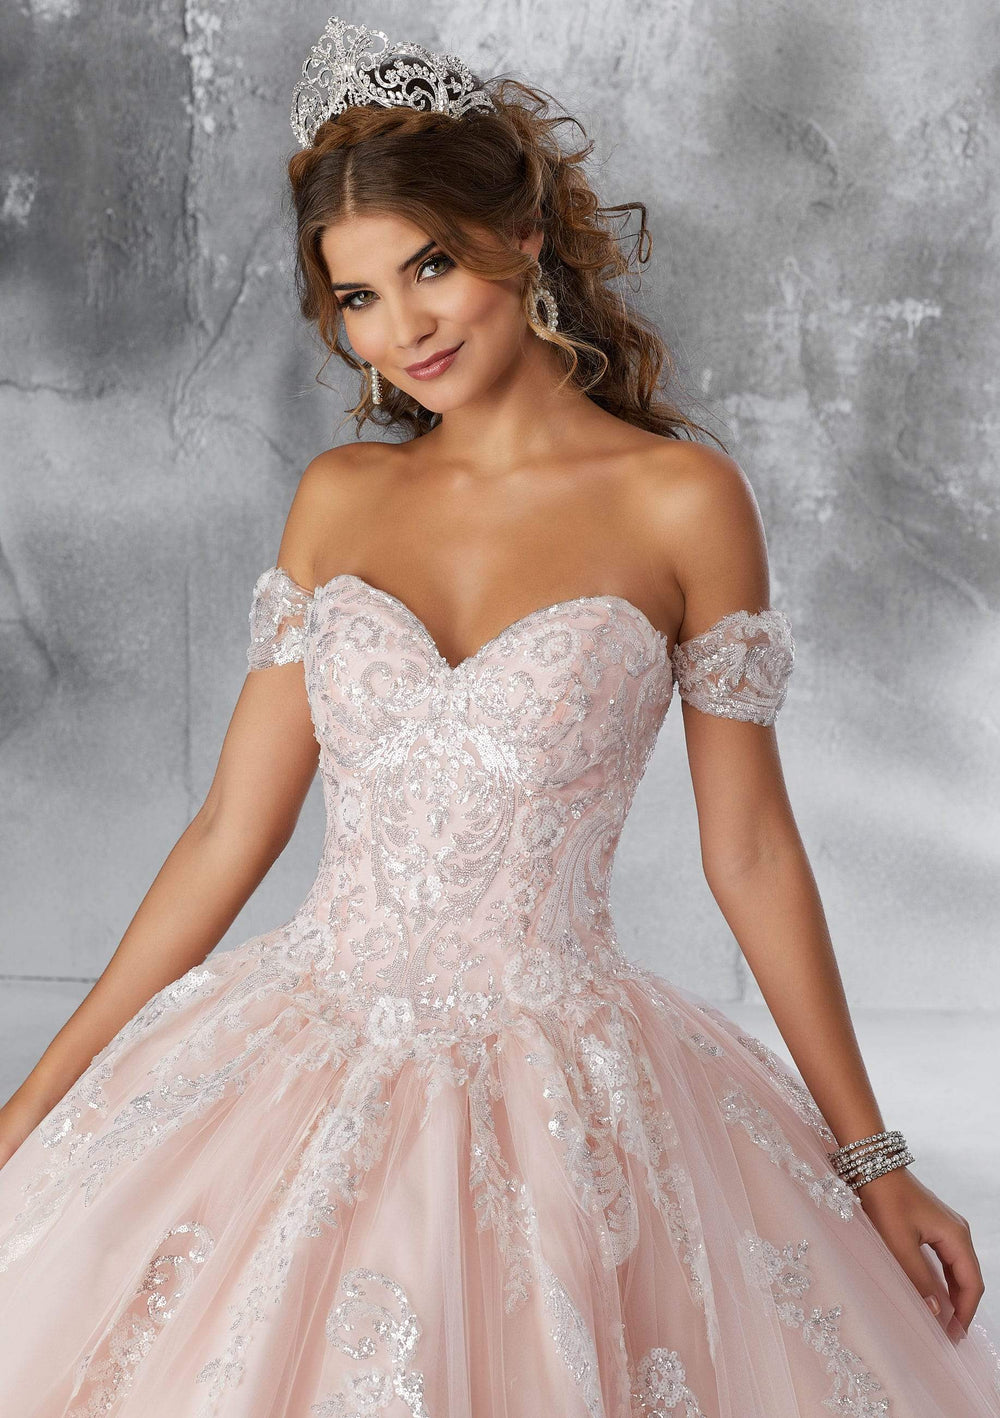 Ivory/Blush Sweetheart Neckline Ball Gown Quinceanera Dress www.quinceofyourdreams.com